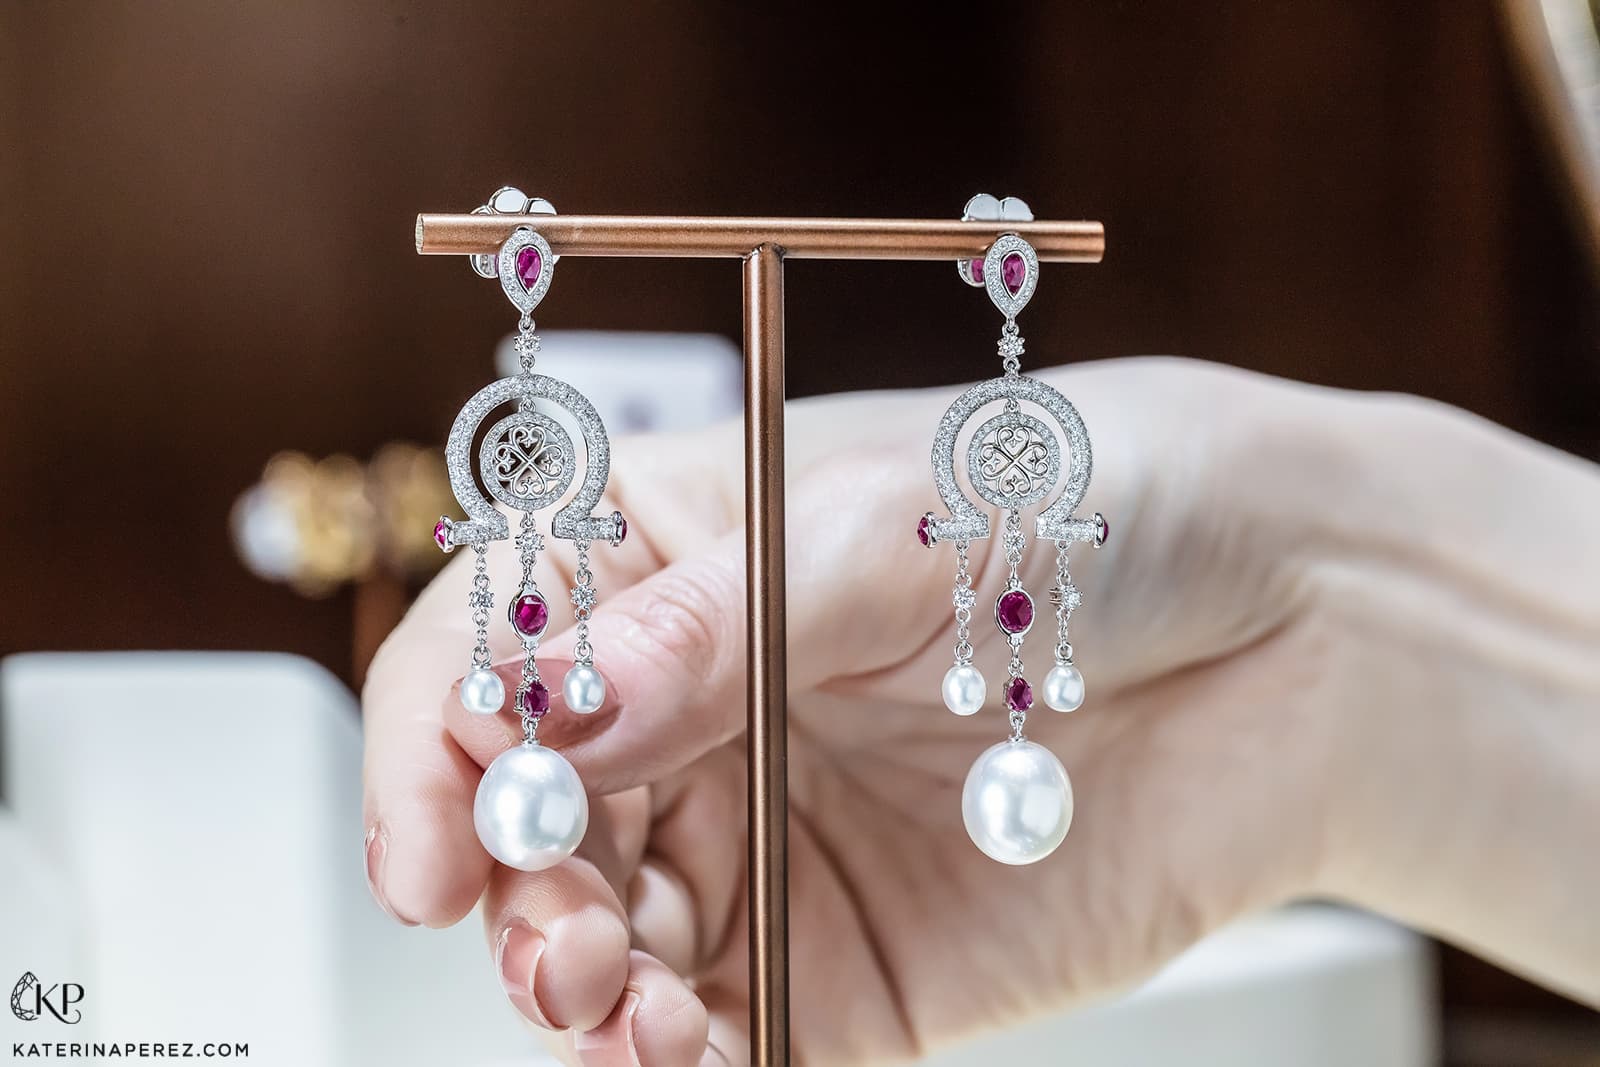 Autore 'Mediterranean' collection chandelier earrings with diamonds, rubies and South Sea pearls in 18k white gold